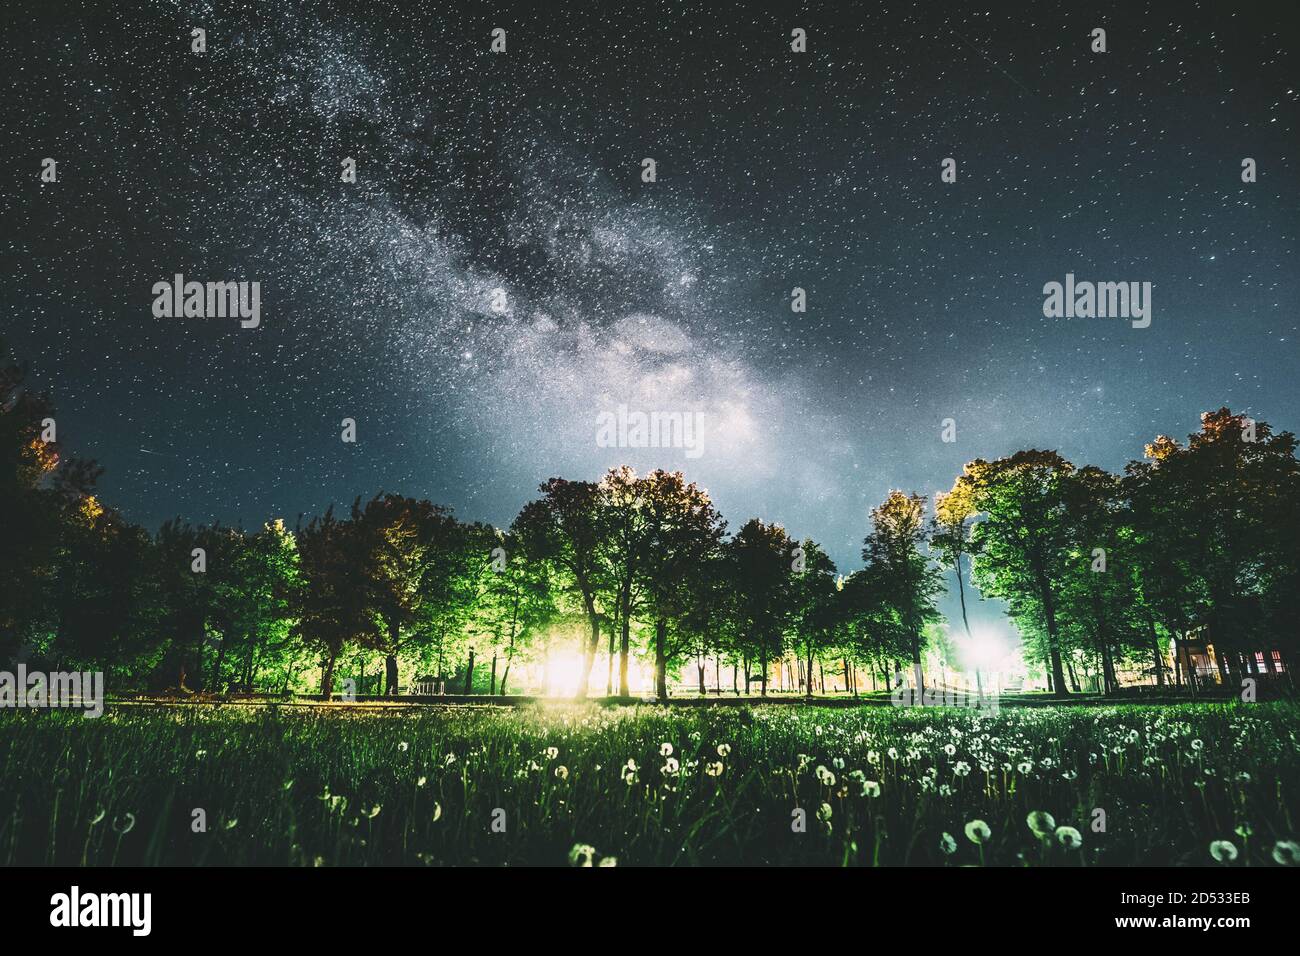 Green Trees Woods In Park Under Night Starry Sky In Violet Color. Landscape With Glowing Milky Way Stars Over Meadow At Summer Season. View From Stock Photo